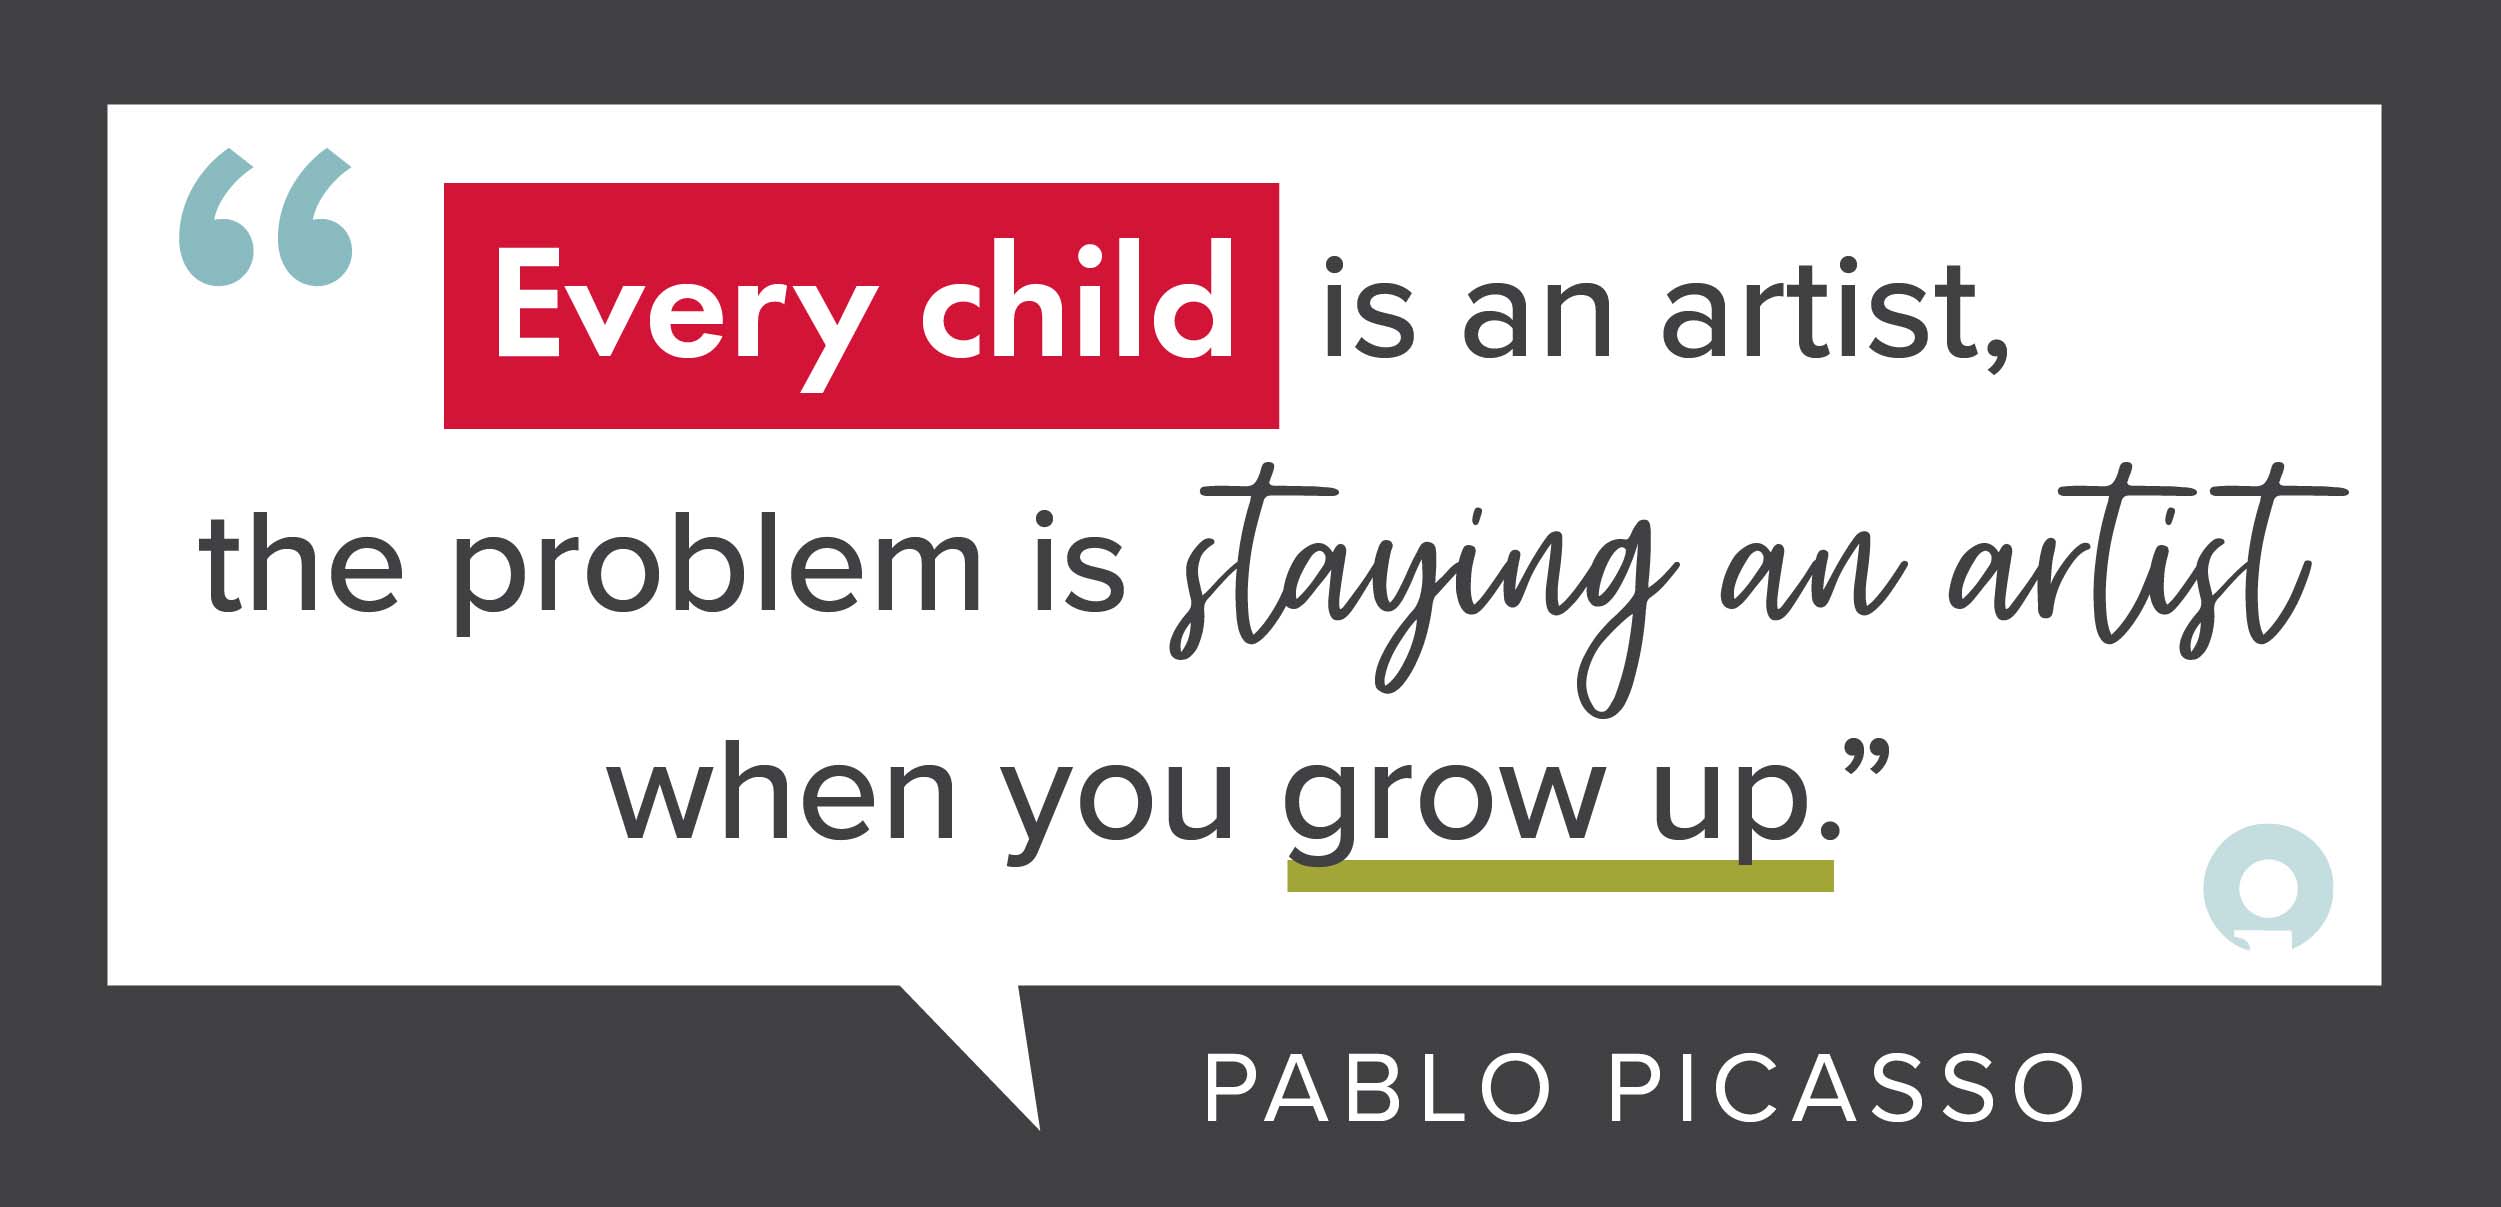 “Every child is an artist, the problem is staying an artist when you grow up” - Pablo Picasso